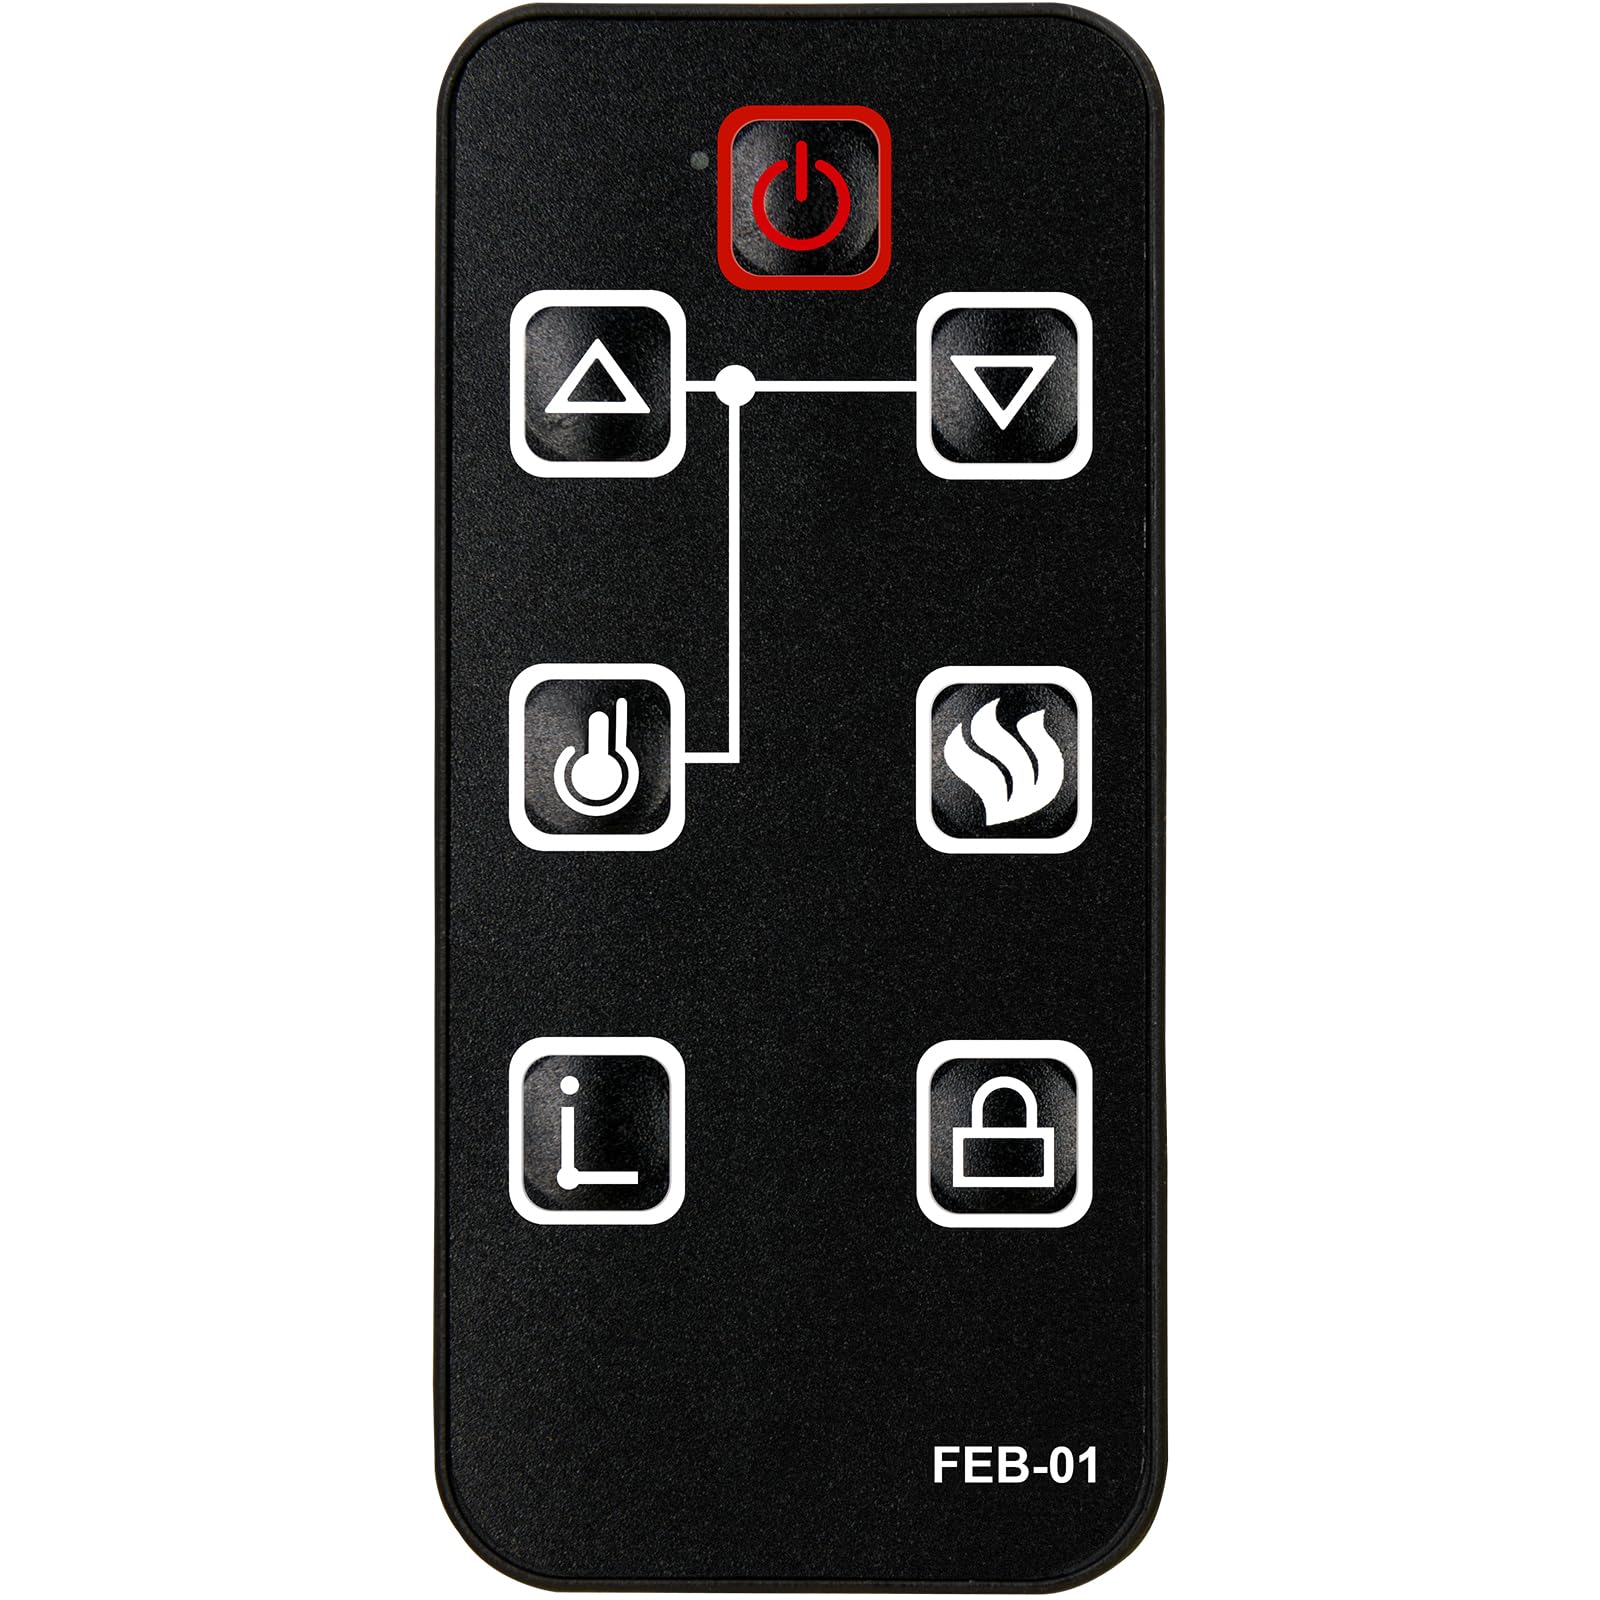 Replacement for FEBO Flame Electric Fireplace Remote Control F13-1-002-021 2014-411002